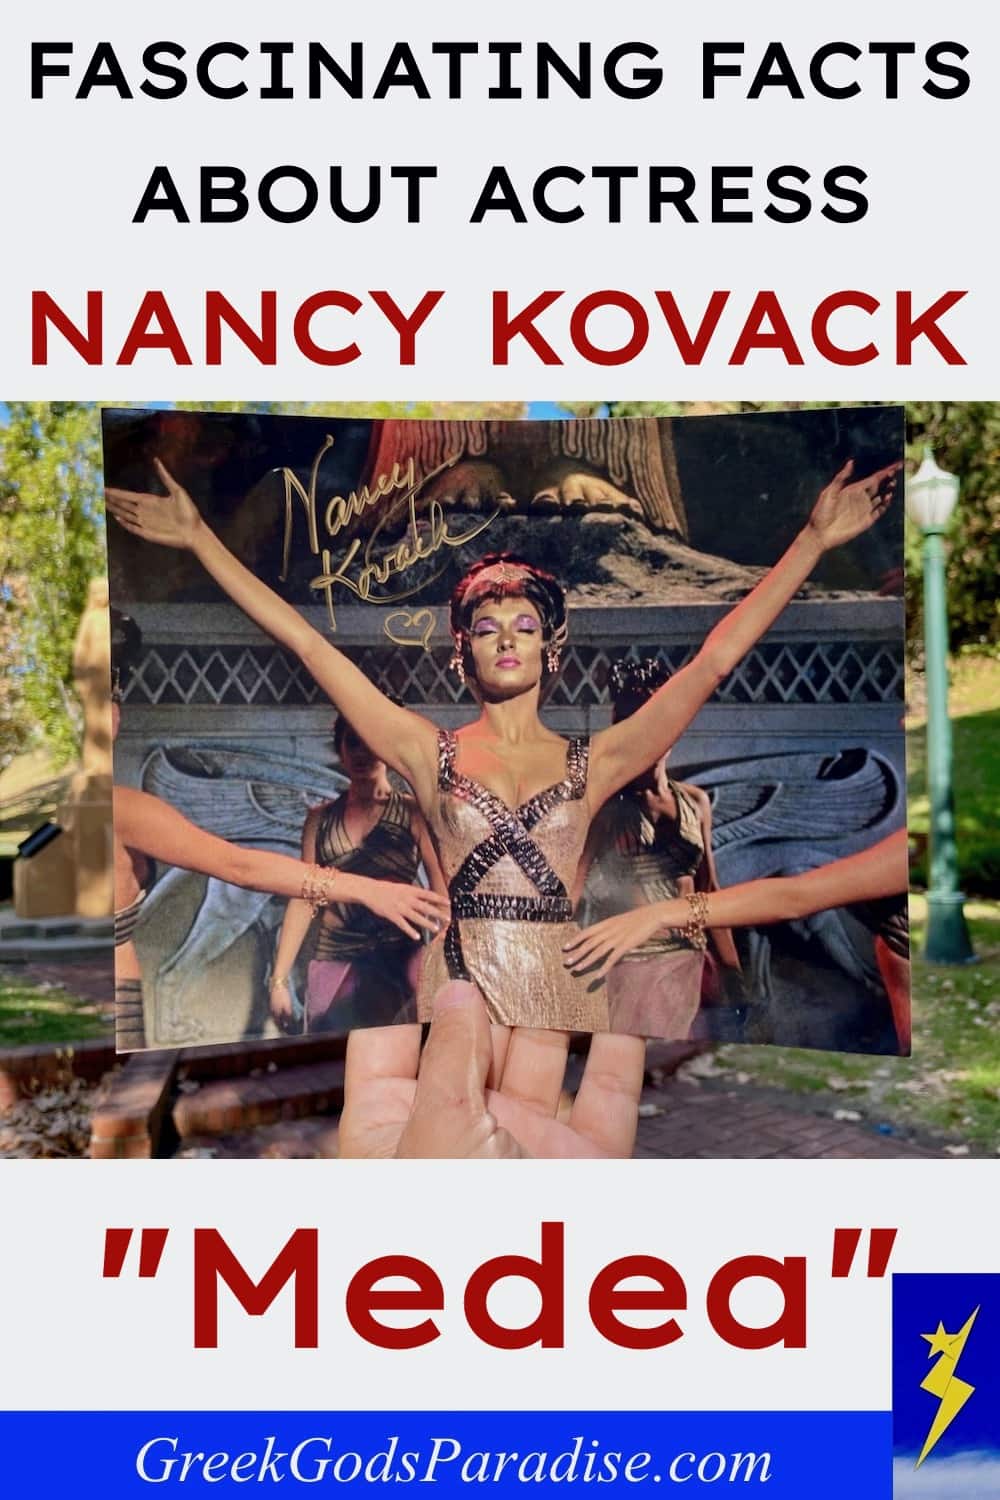 Fascinating Facts about Nancy Kovack Medea